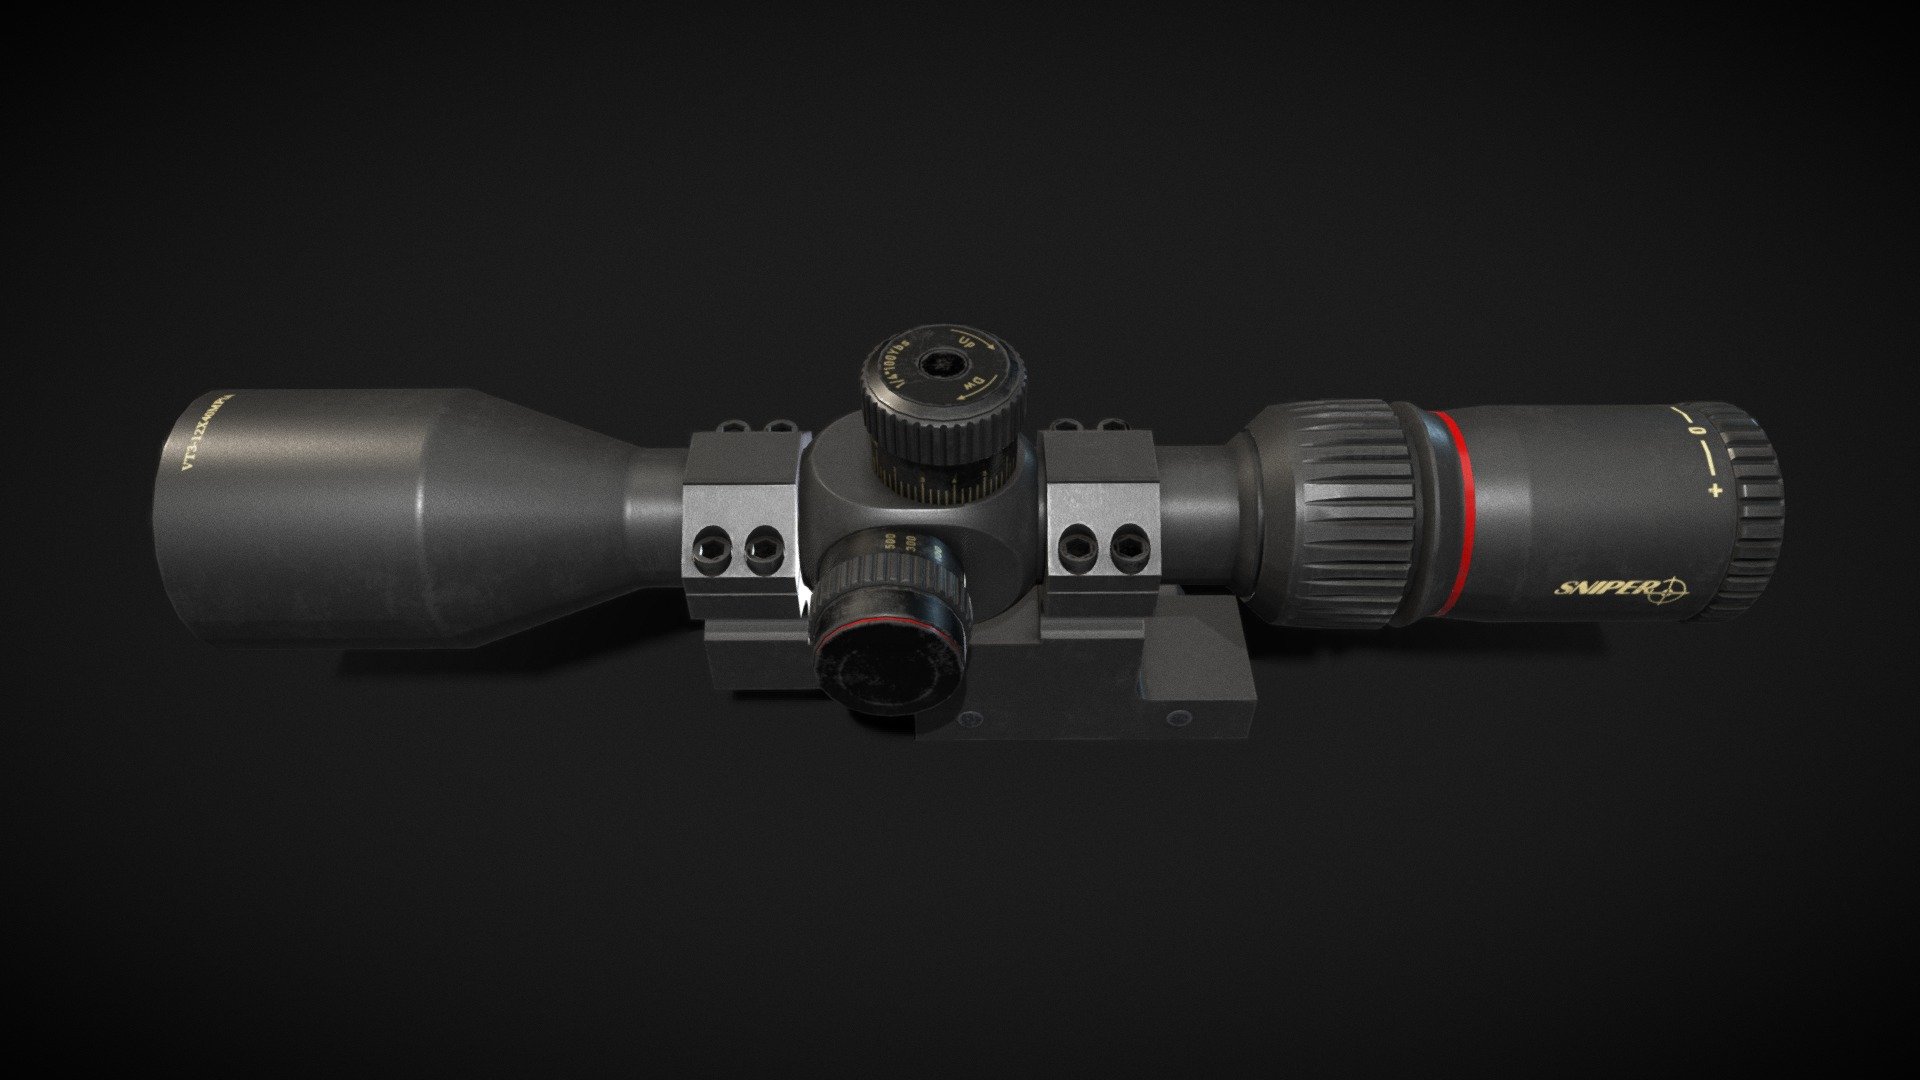 3D model of the VT 3-12X40 weapon scope made for sniper rifles.
This scope has a 12X zoom.

4K Textures 3d model